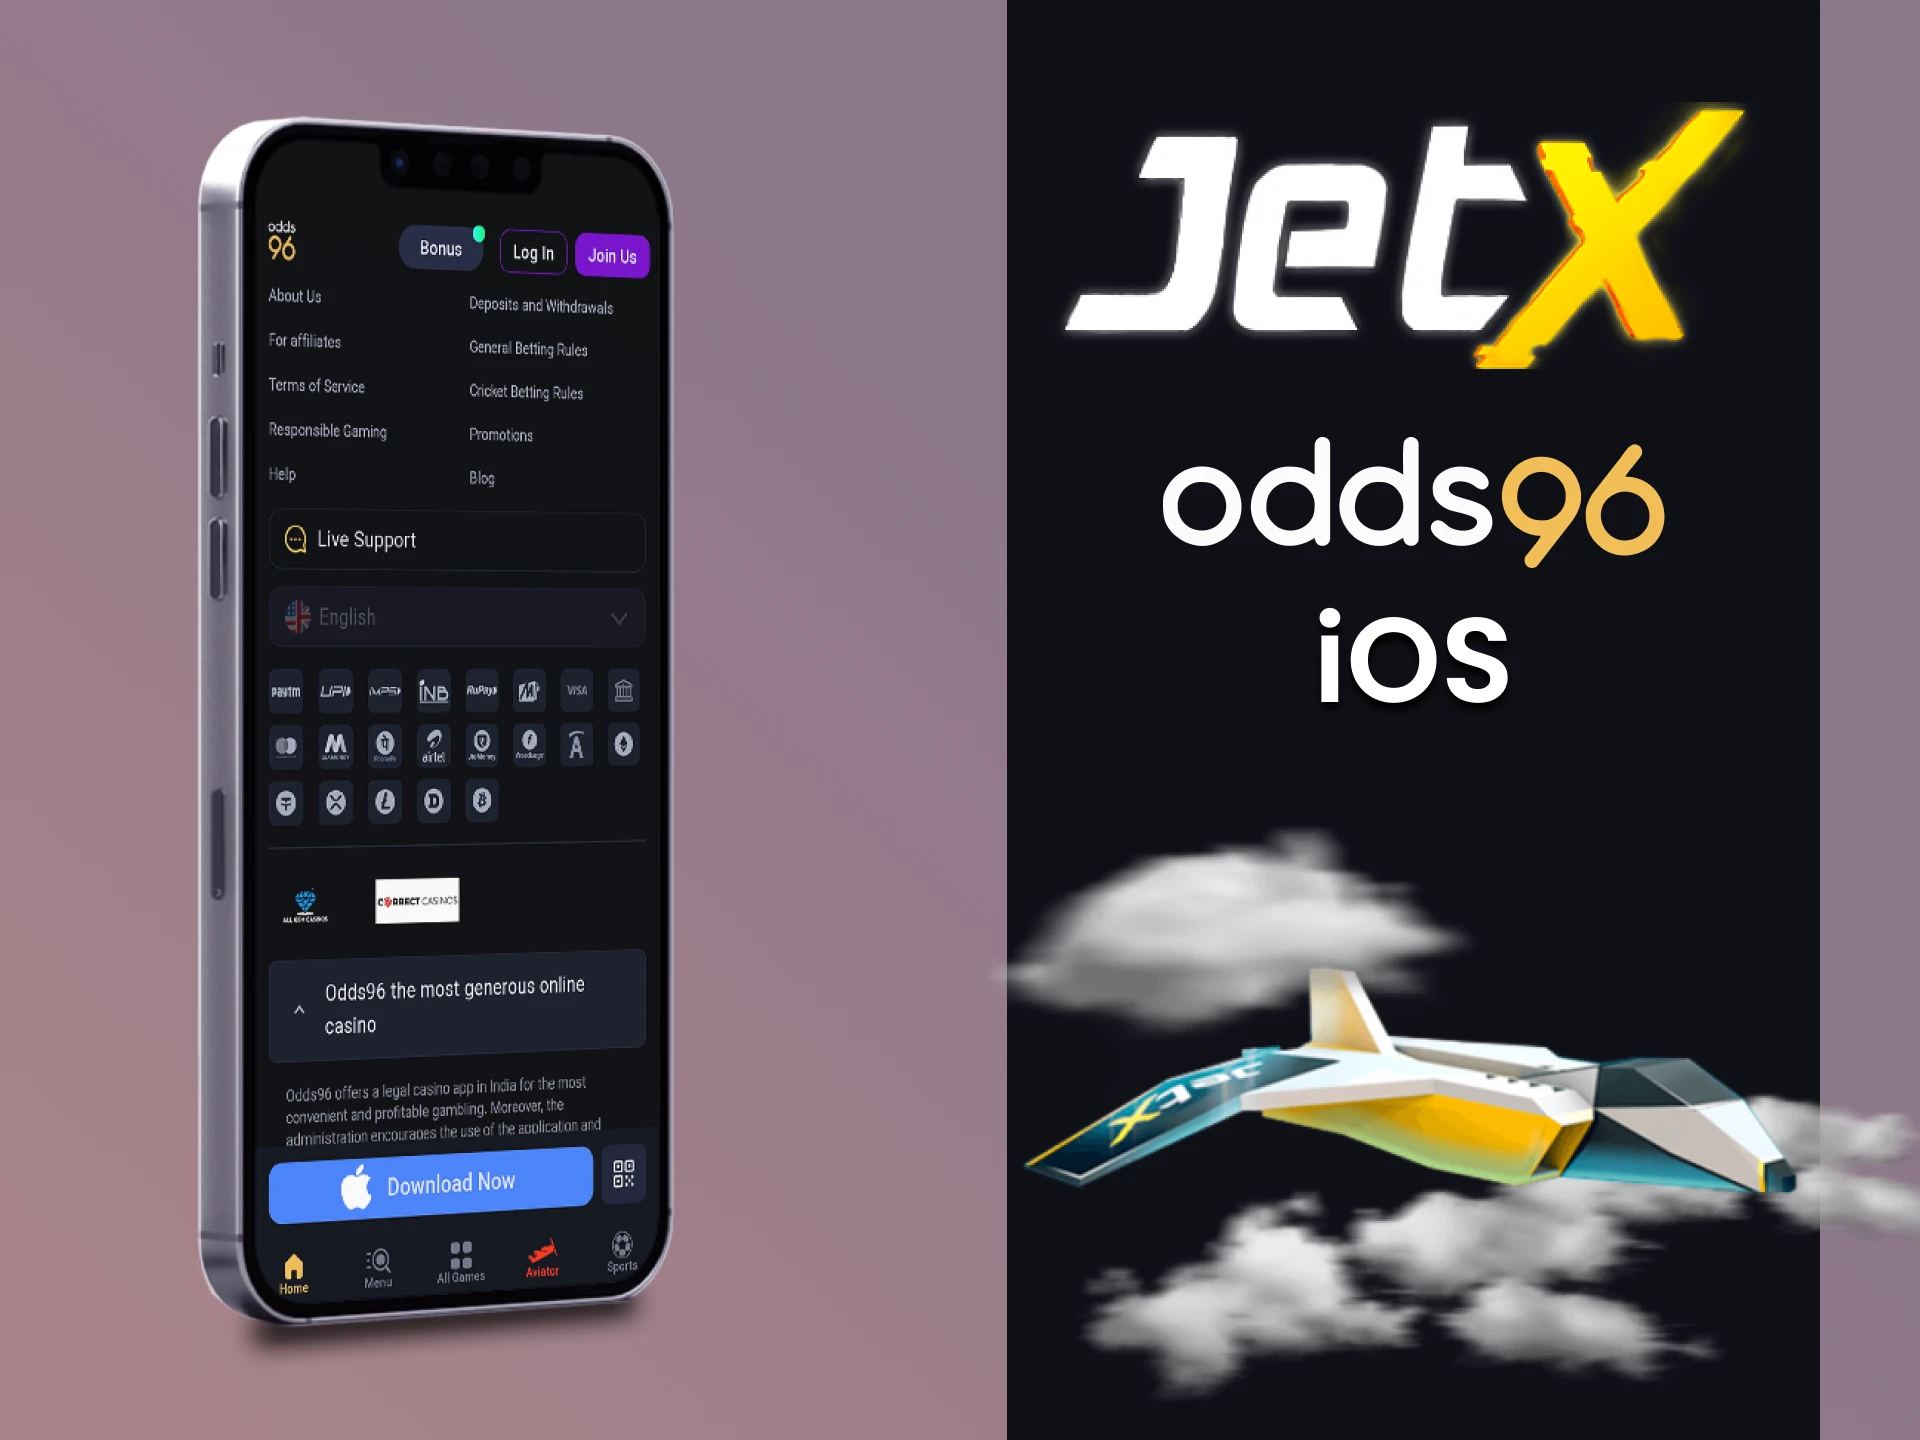 Install the Odds96 app on iOS to play JetX.